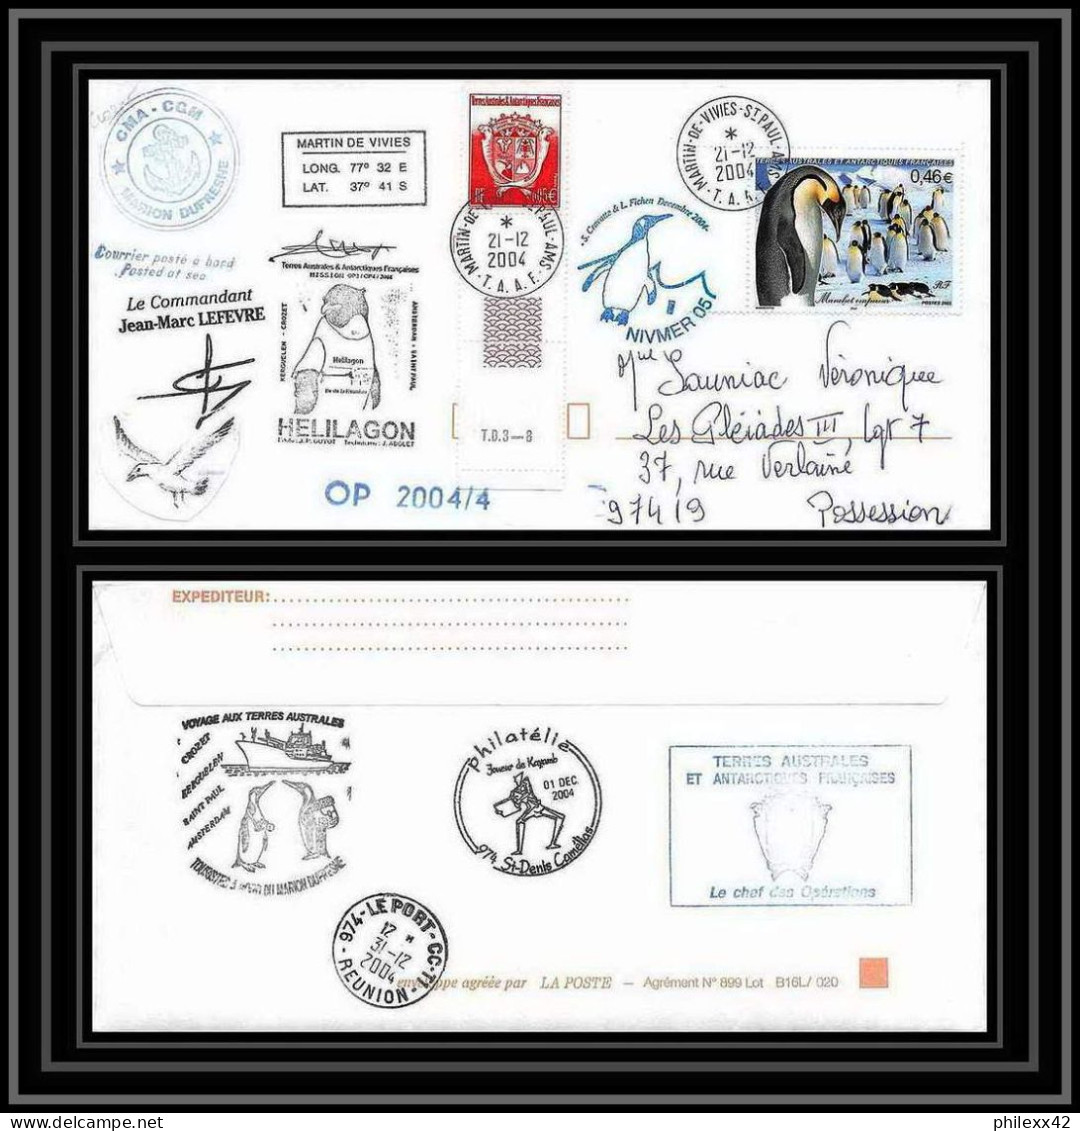 2484 ANTARCTIC Terres Australes TAAF Lettre Cover Dufresne 2 Signé Signed OP 2004/4 N°360 21/12/2004 Helilagon - Helicopters